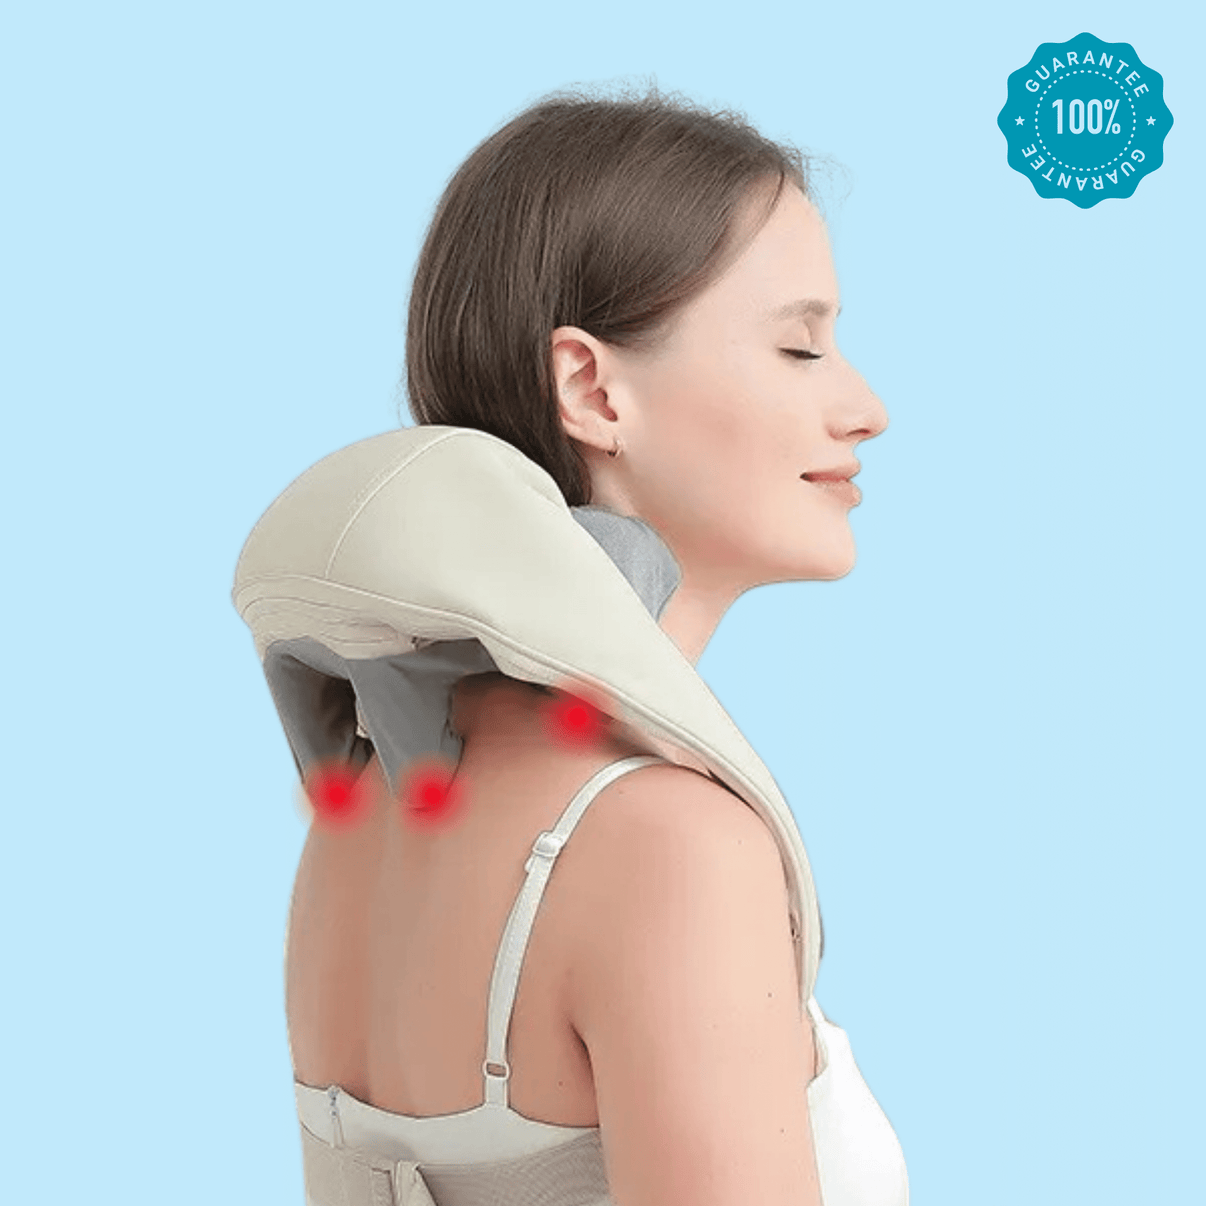 Galax Neck Deep Tissue Massager With Free Projector